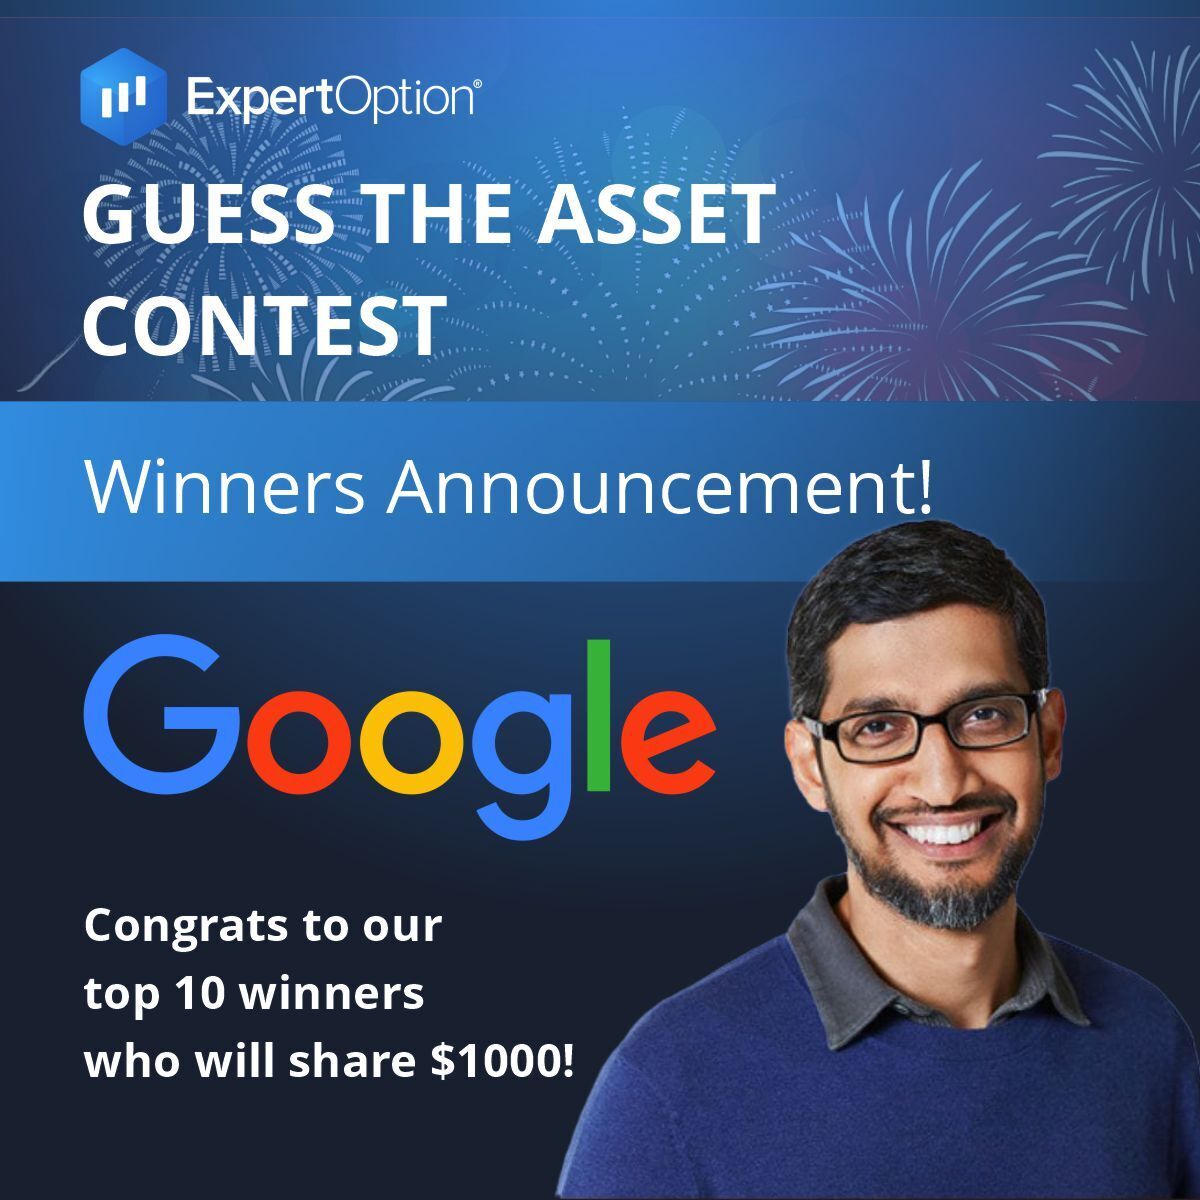 A big thank you to everyone who participated in our Guess the Asset Contest! And congrats to our 10 winners — each getting a well-deserved $100 bonus!
Stay tuned for more contests in the future. Your next chance to shine may be just around the corner!

Join ExpertOption: